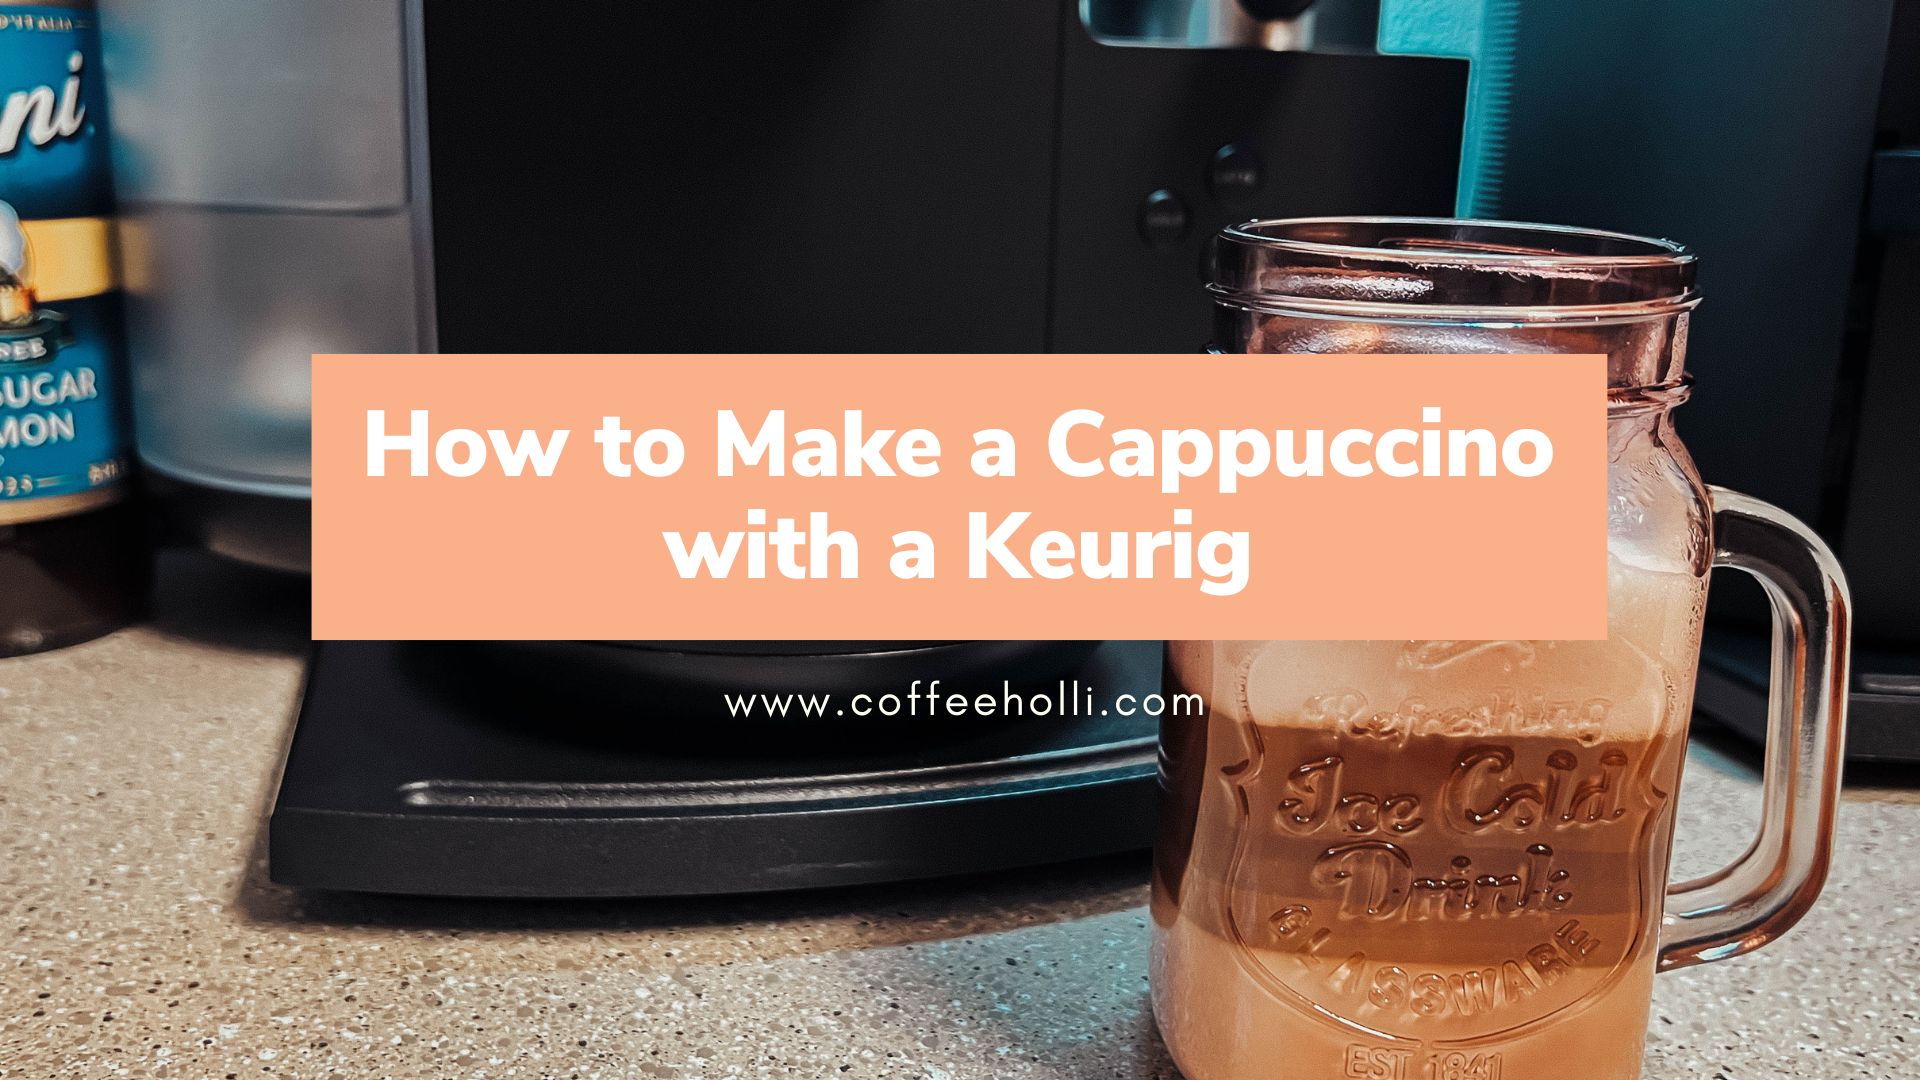 How to Make a Cappuccino with a Keurig